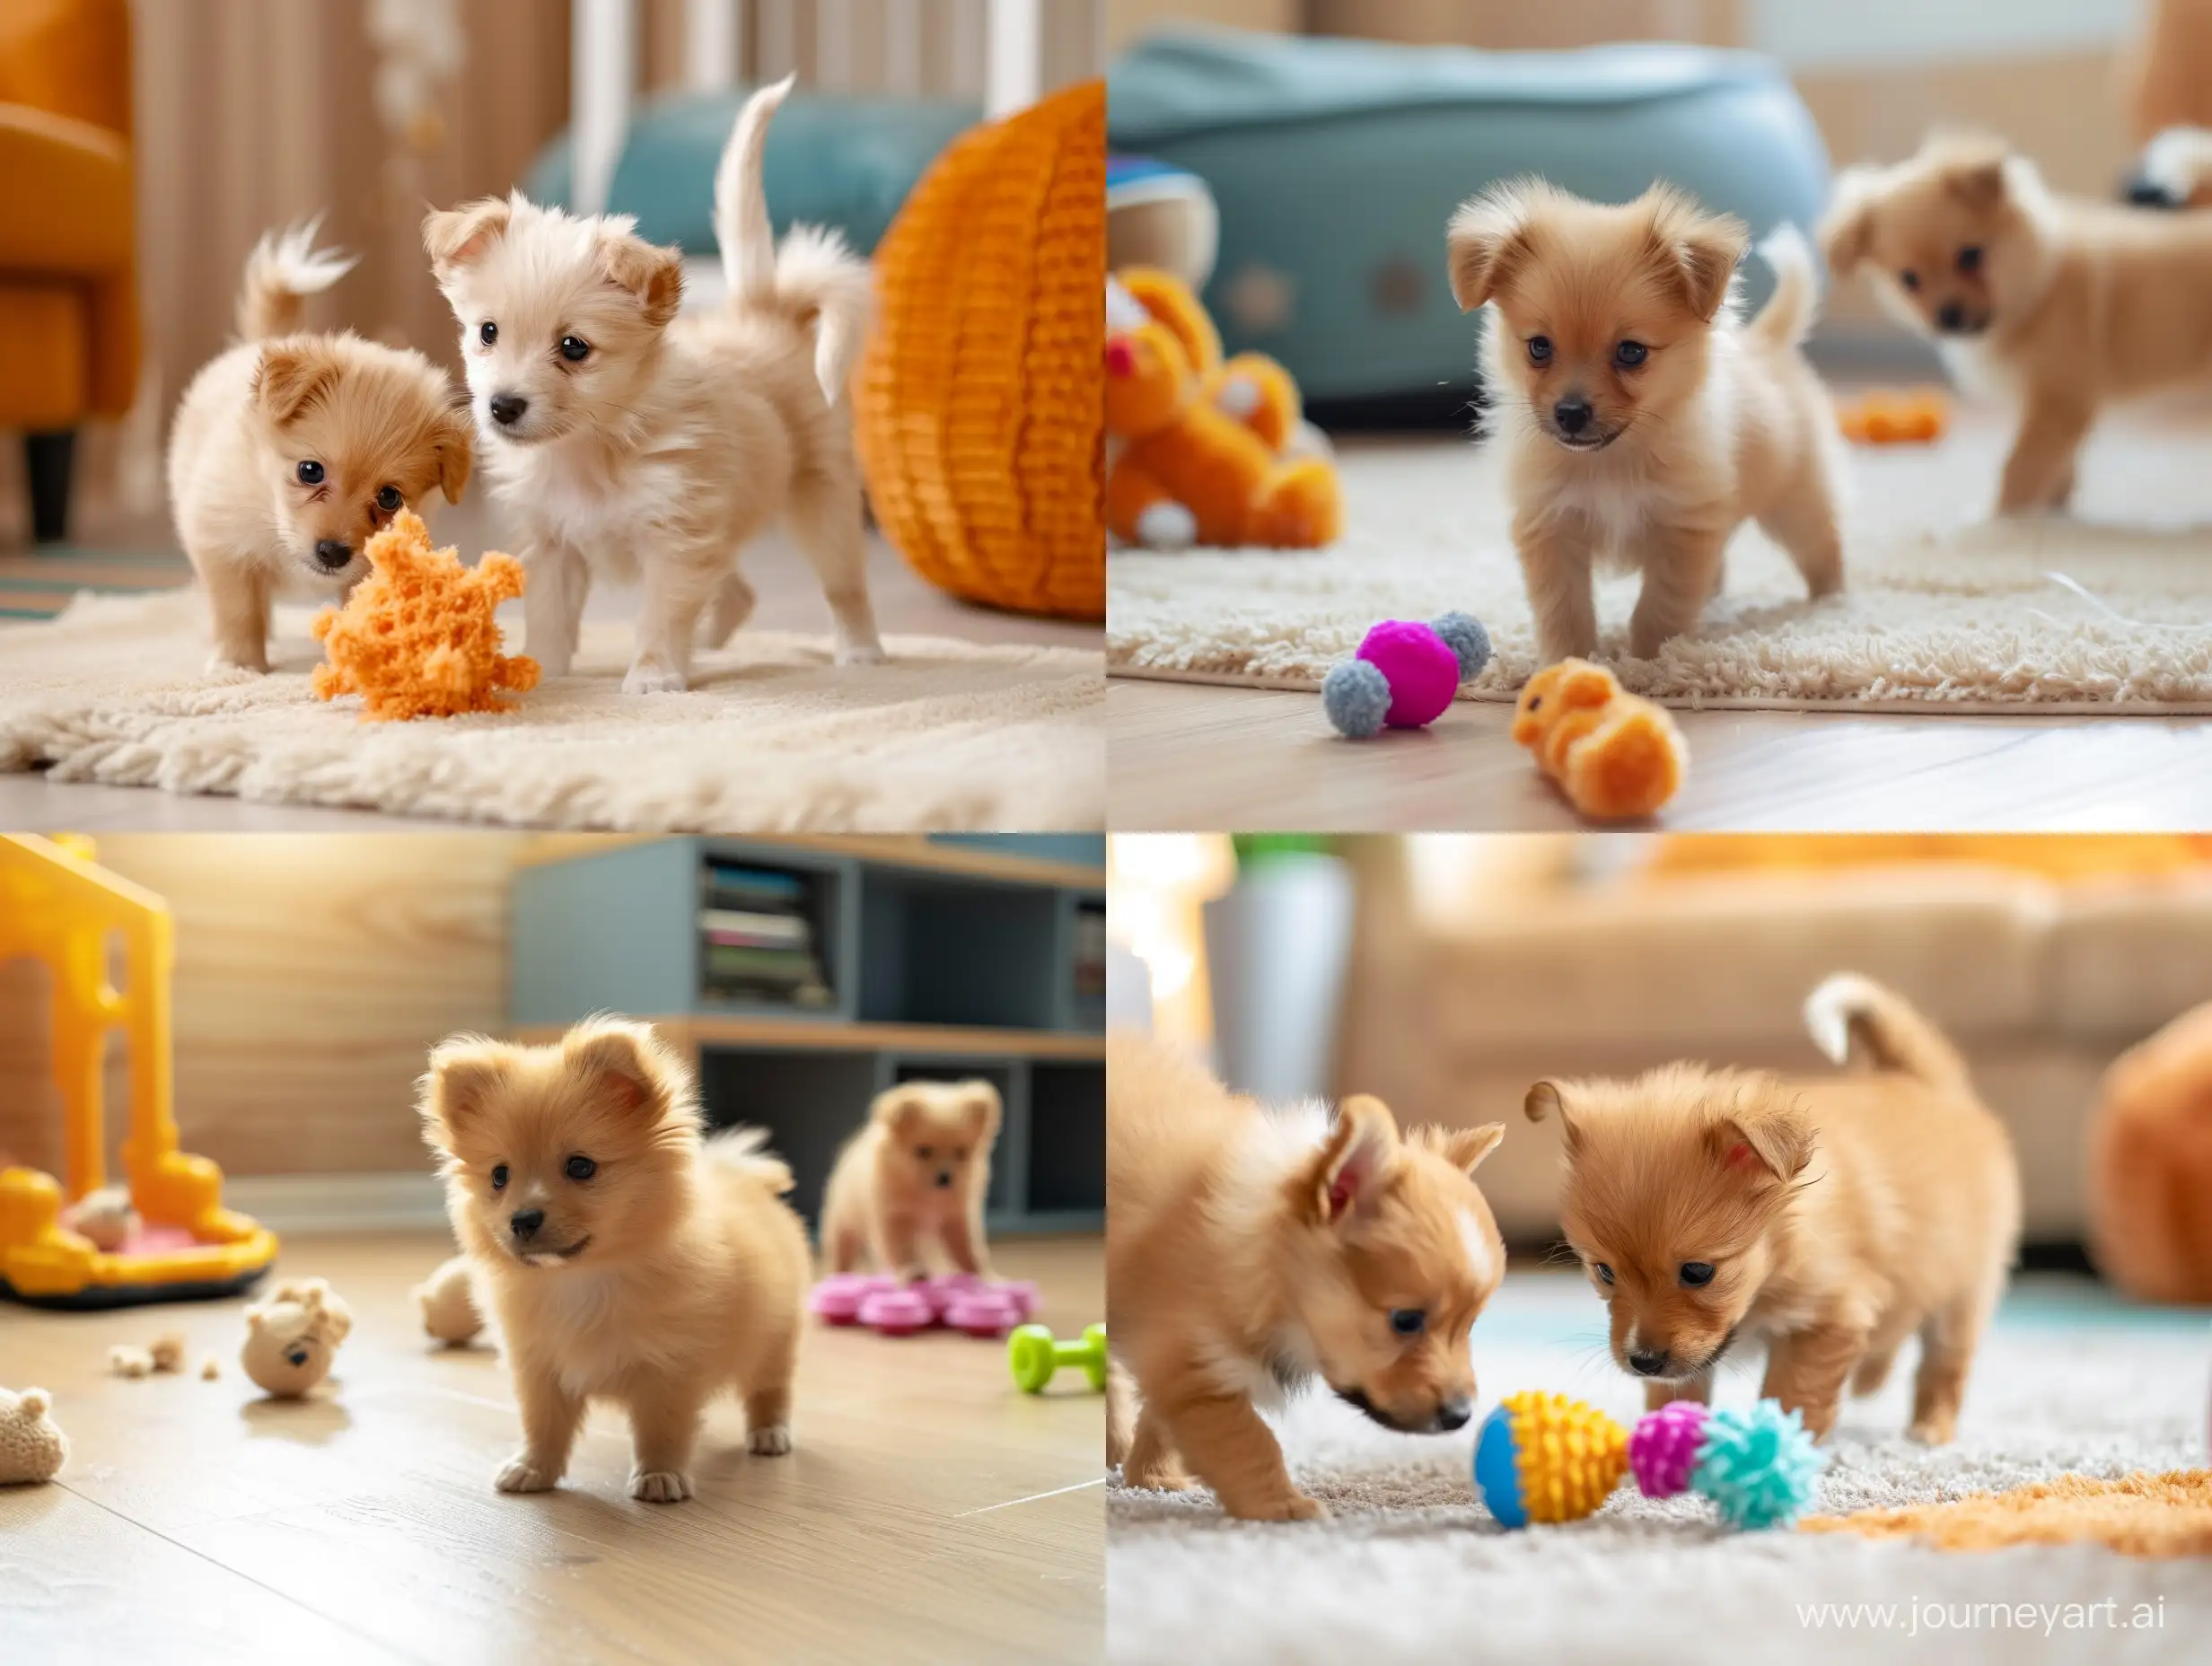 Mini Spitz puppies play with a toy in the room, warm colors